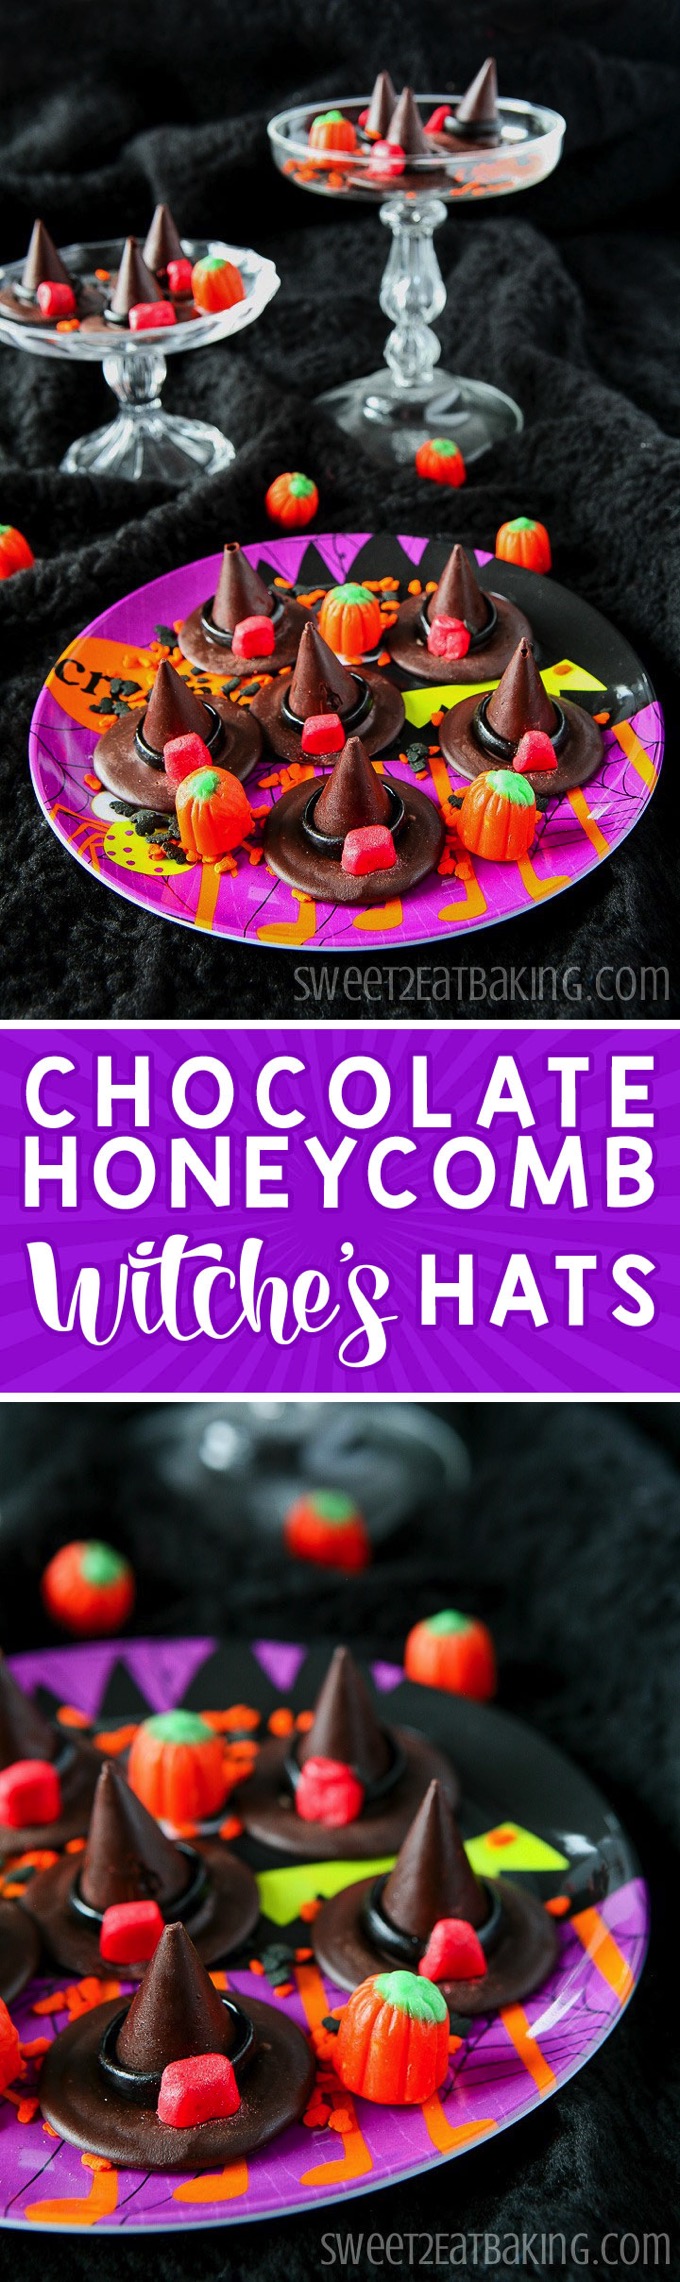 Chocolate Honeycomb Halloween Witches' Hats Recipe by Sweet2EatBaking.com | Spook your friends this Halloween with these edible witches' hats. They're made from crushed honeycomb and chocolate with liquorice and fondant ribbon details. Quick and easy to make, looks impressive, and perfect for a Halloween Party.